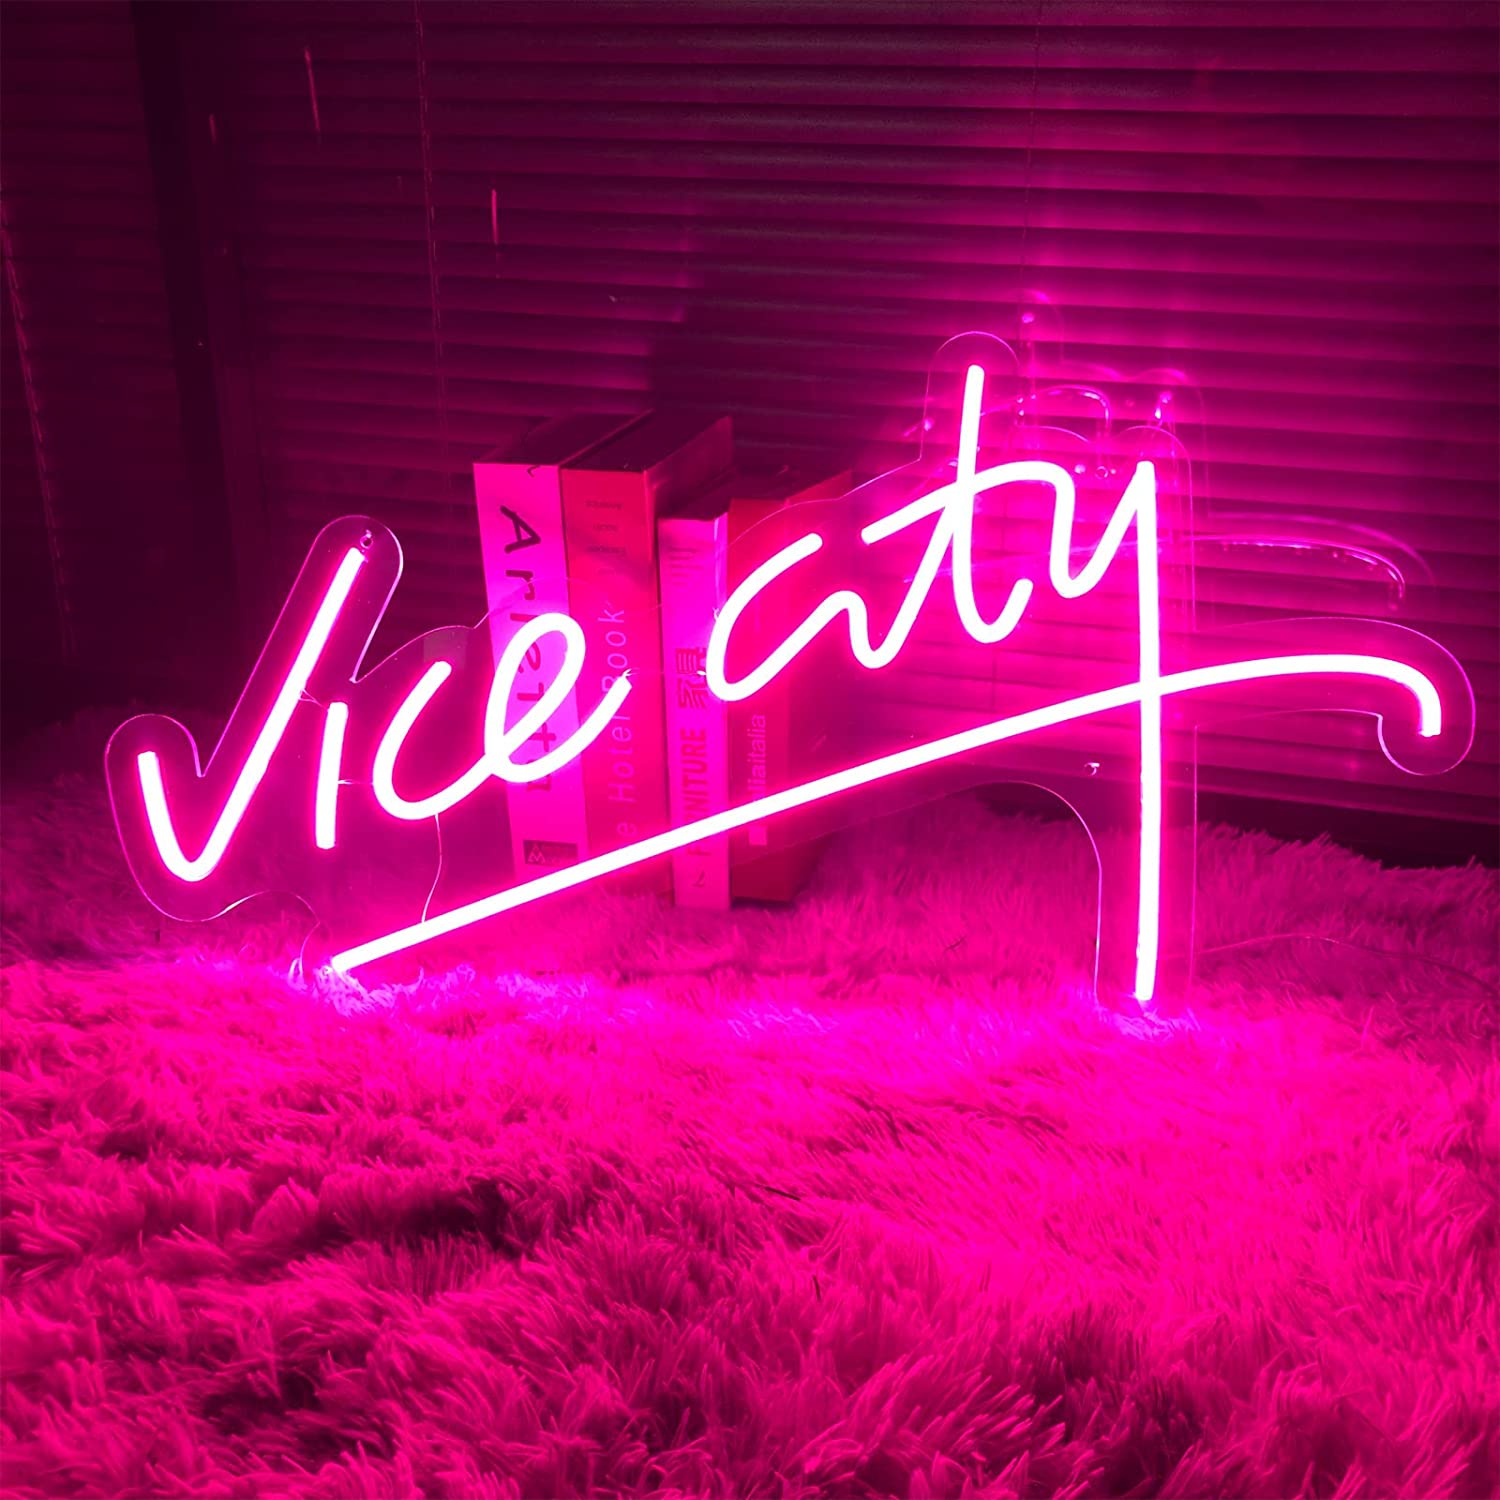 A Custom Neon Sign Video Game For Your Room